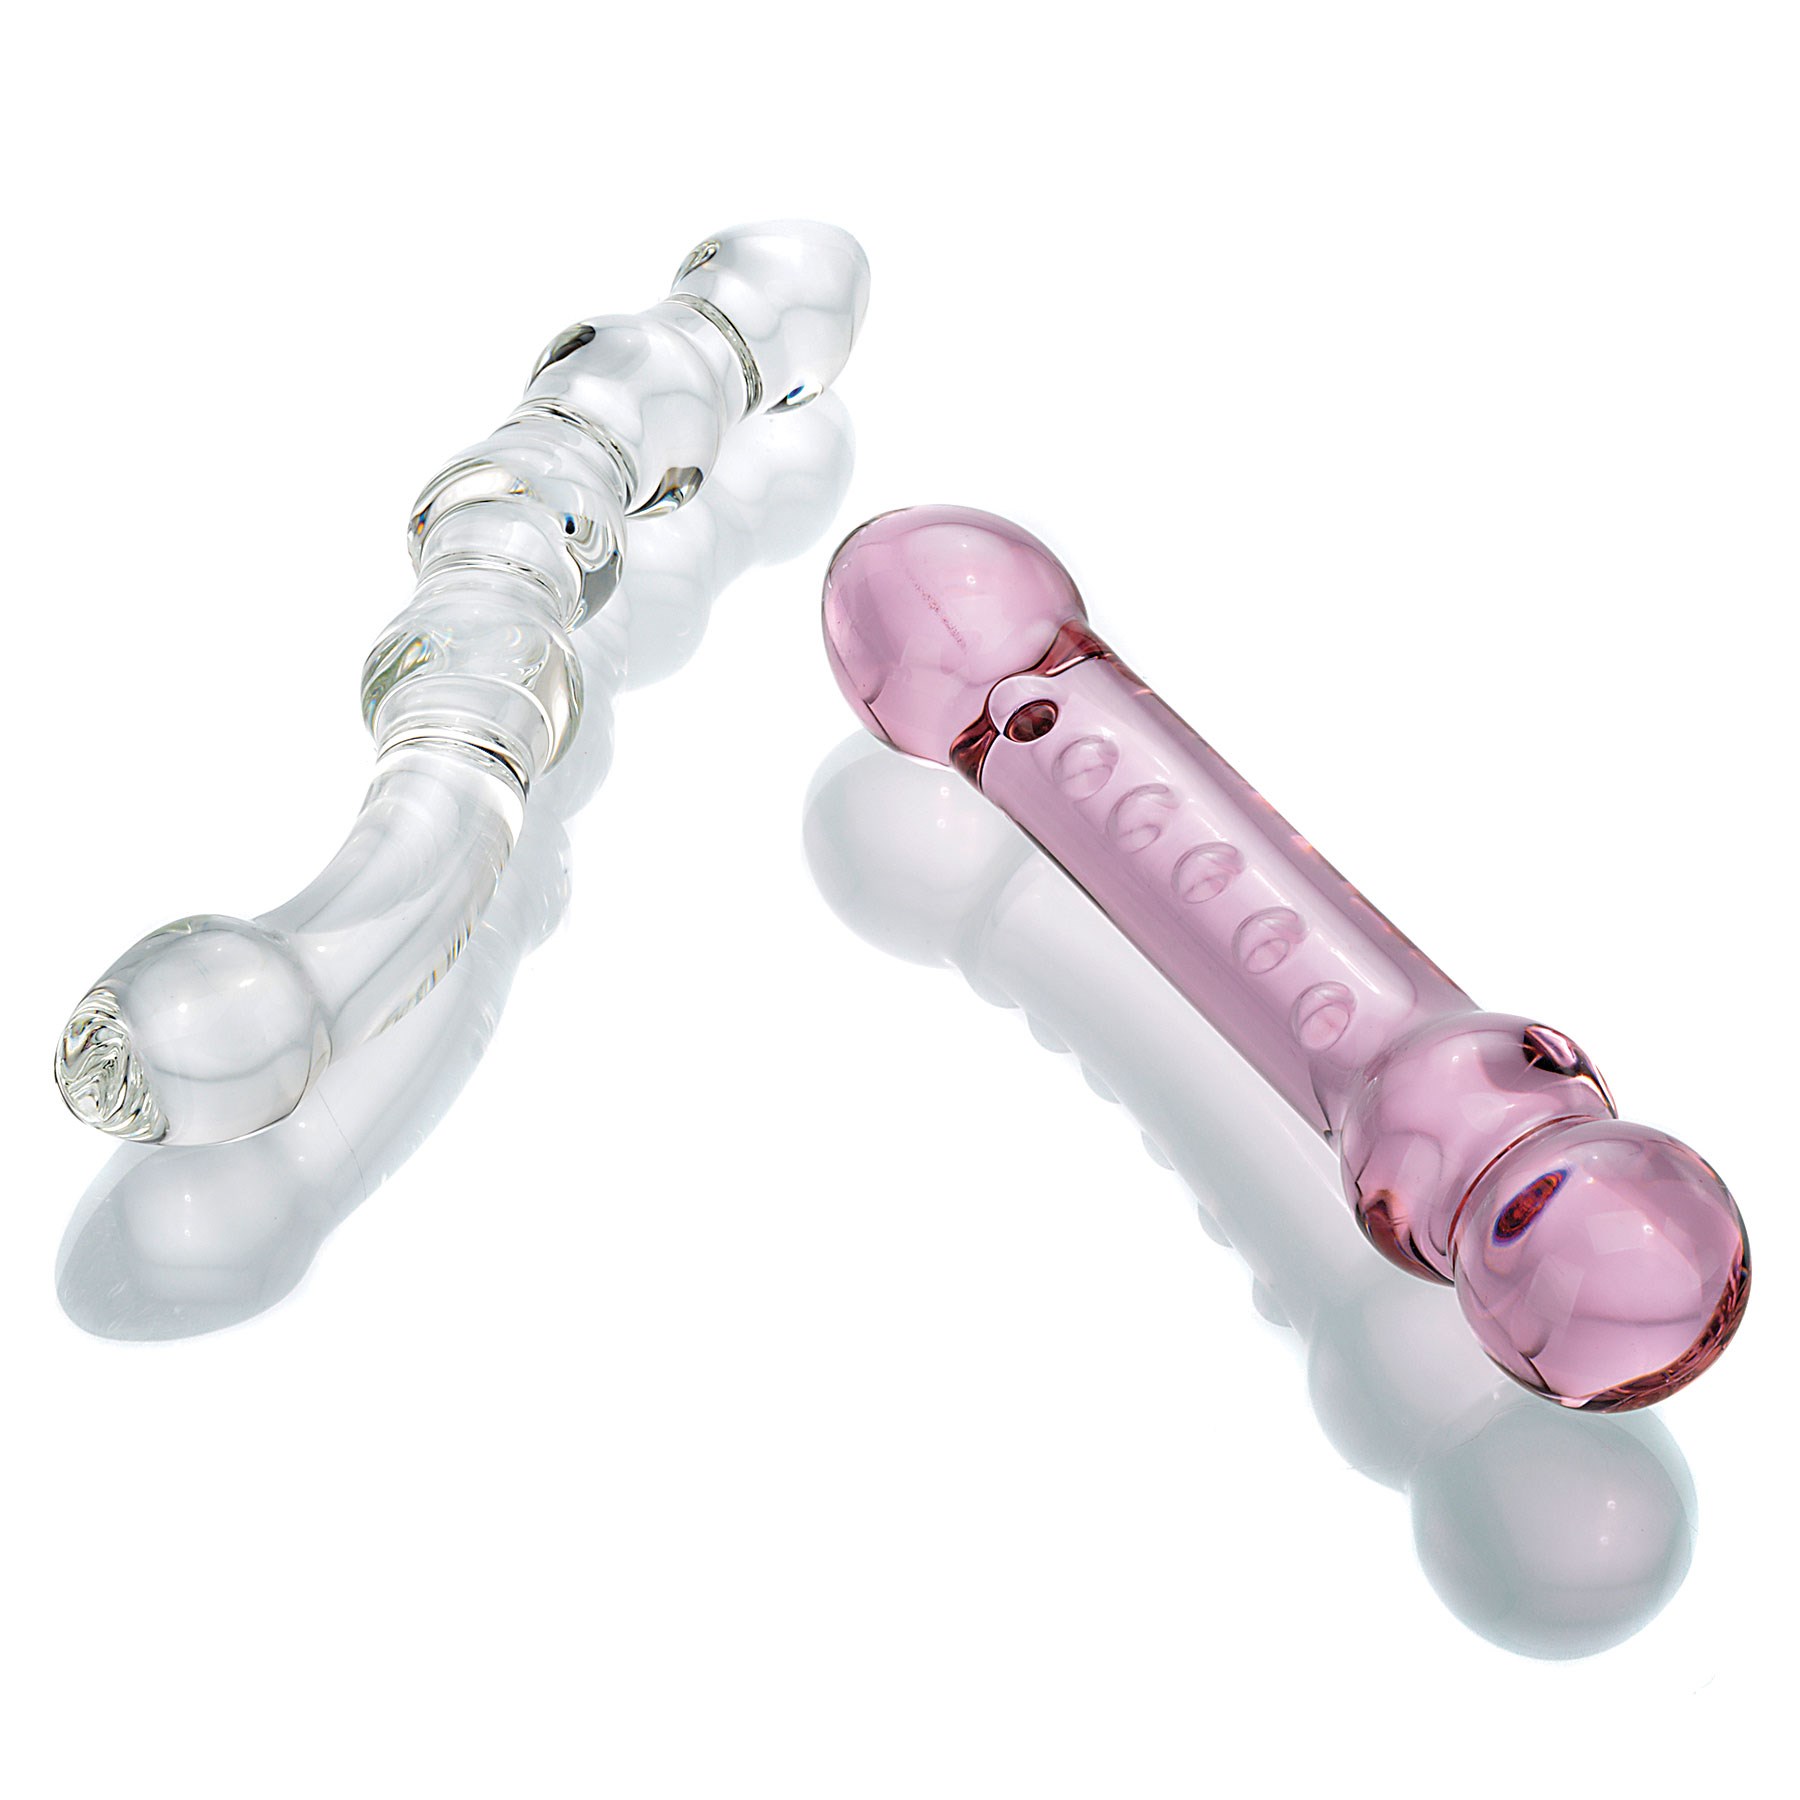 Glas 2 Piece Glass Dildo Pleasure Set pink and clear